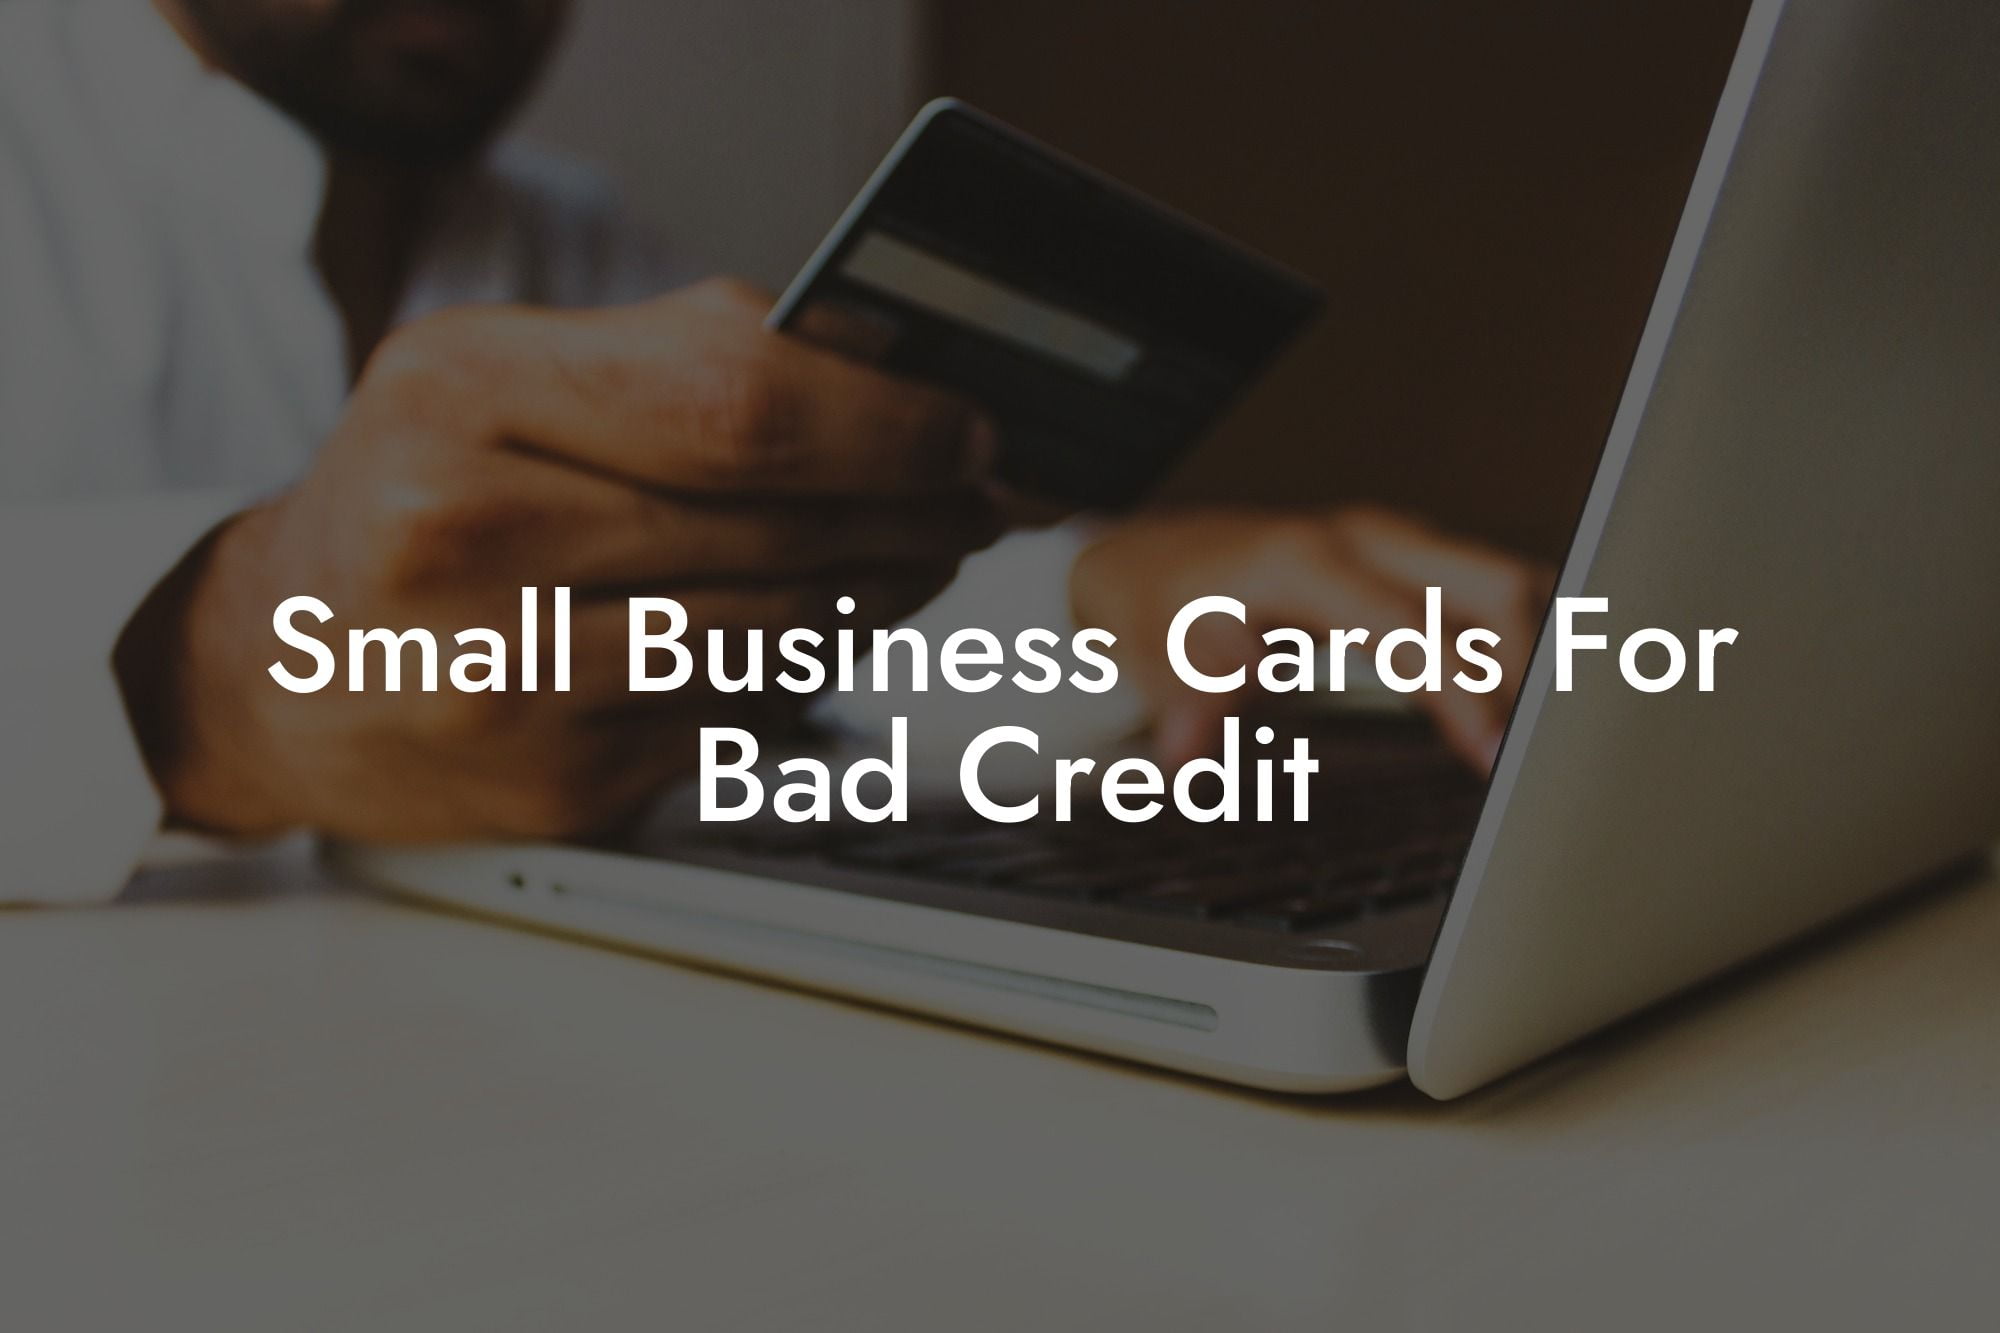 Small Business Cards For Bad Credit